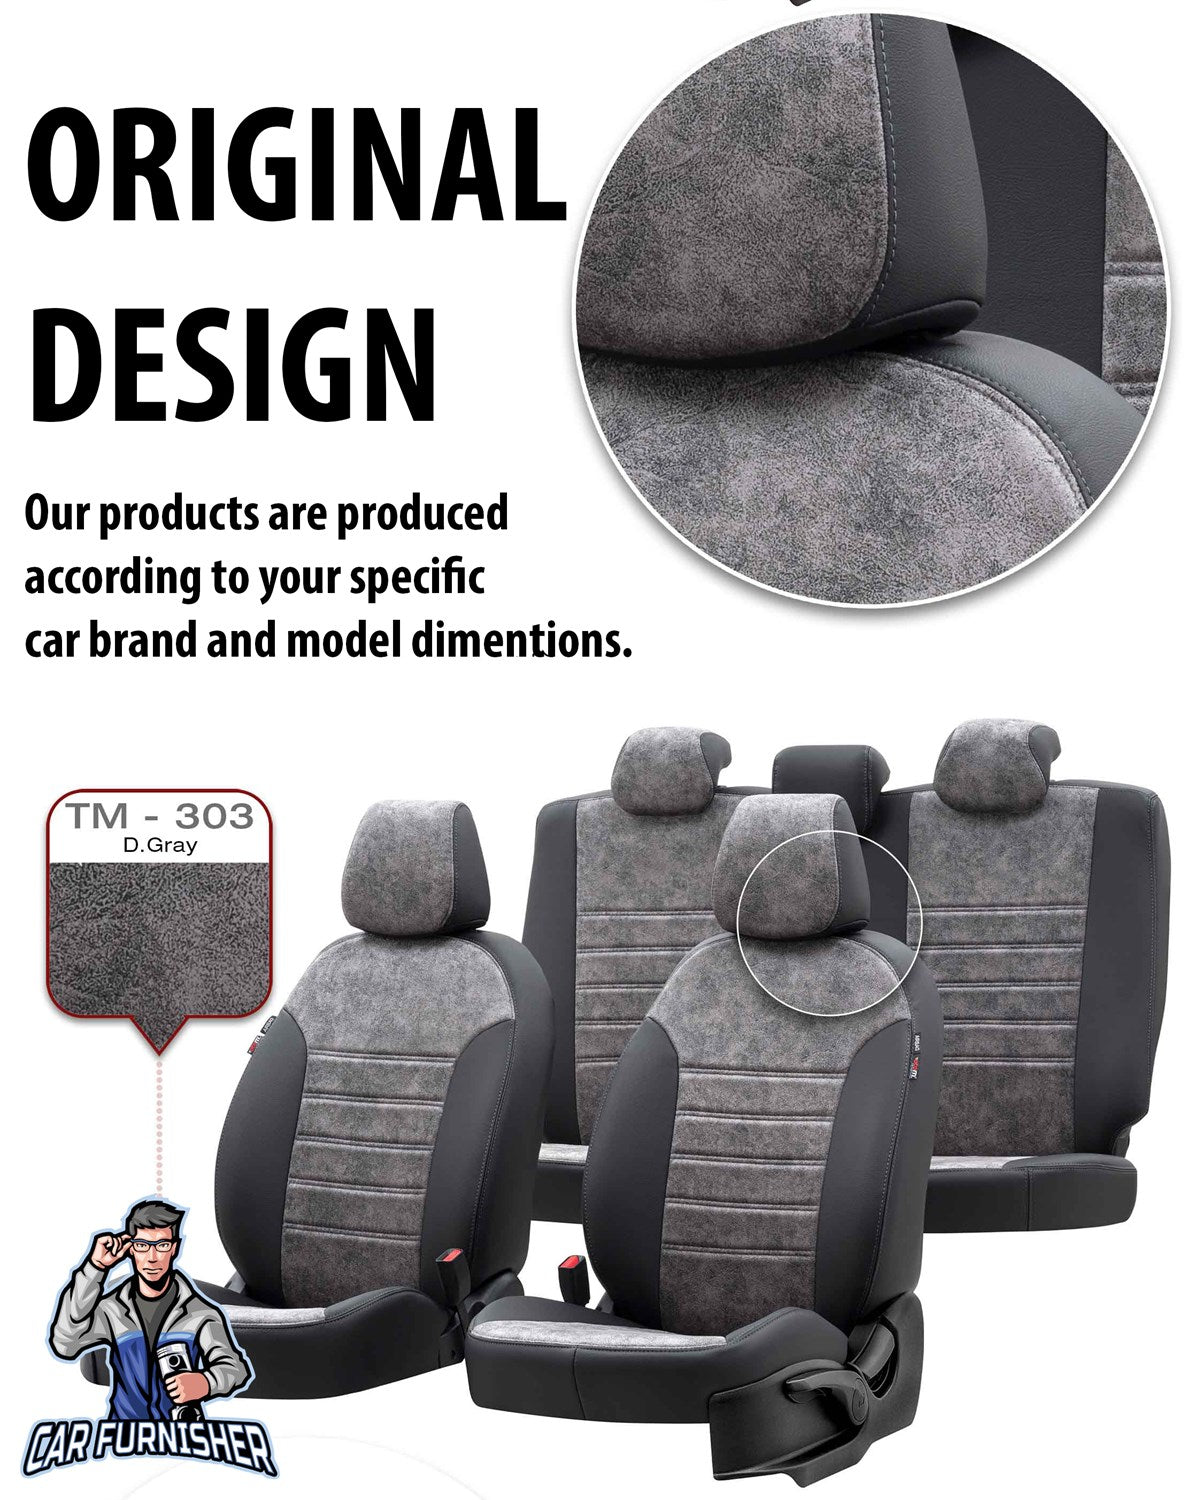 Renault Broadway Seat Covers Milano Suede Design Burgundy Leather & Suede Fabric